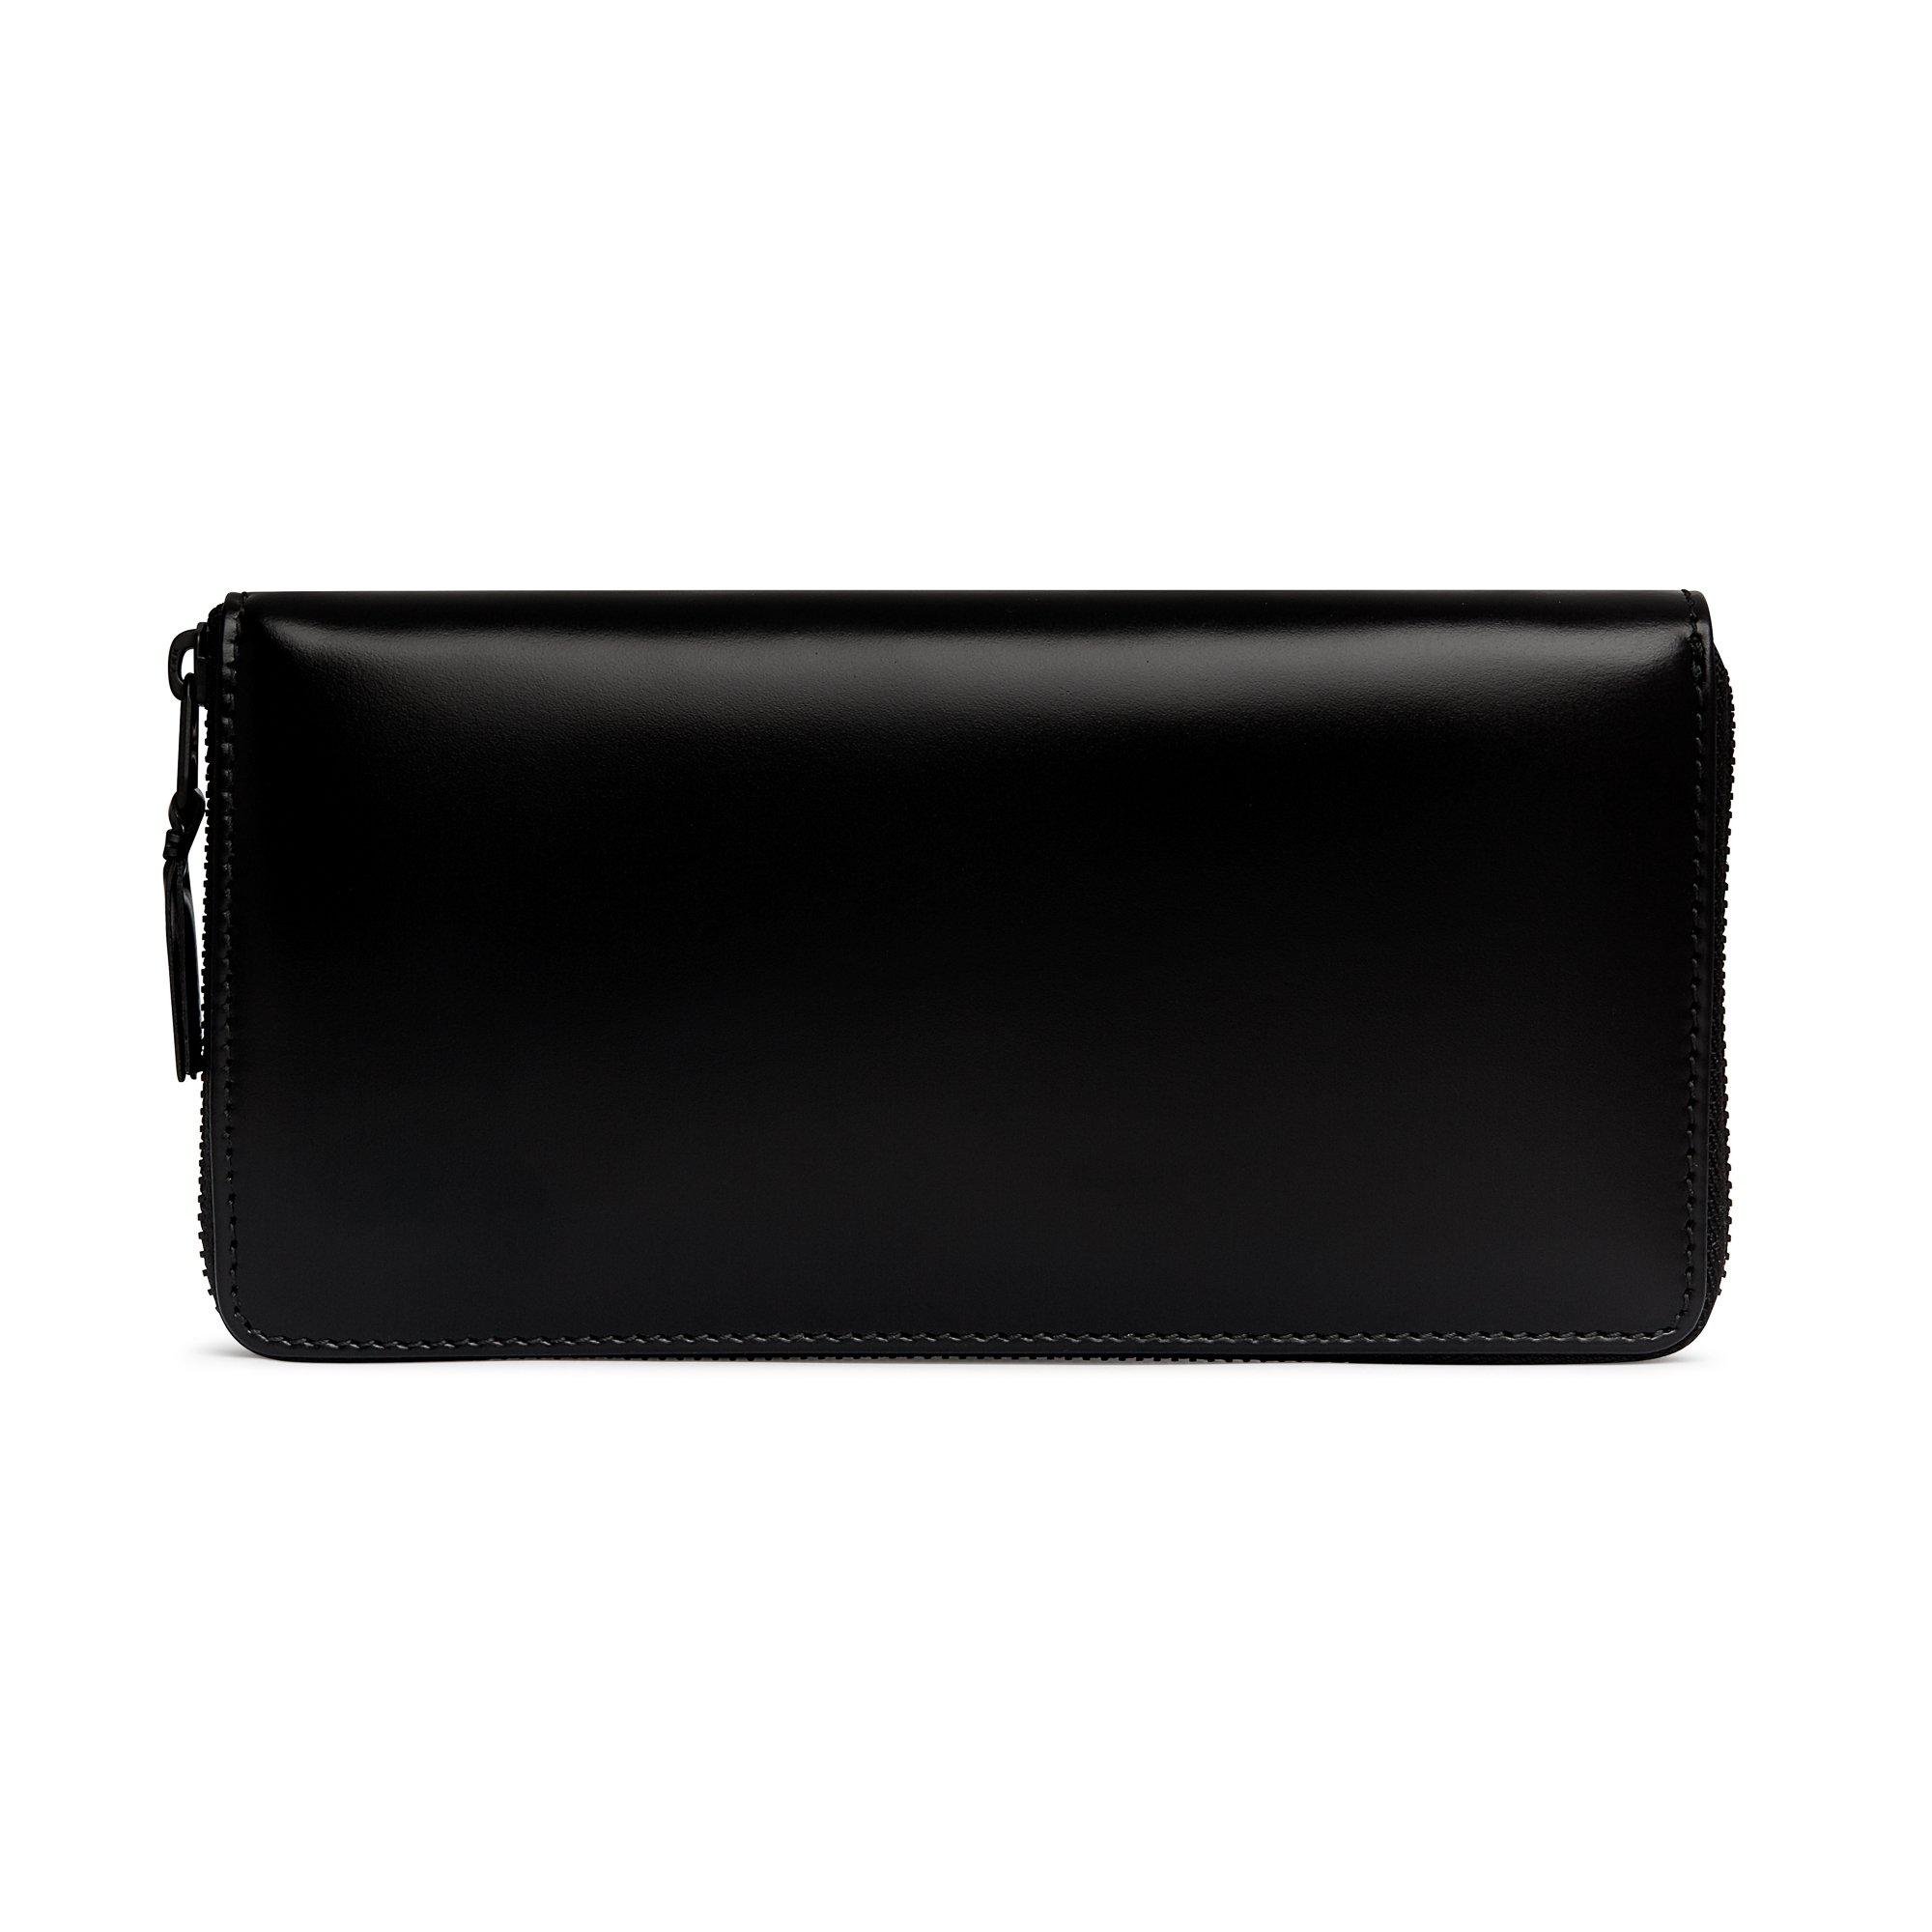 CDG Wallet - Very Black - (SA0110VB) by COMME DES GARCONS